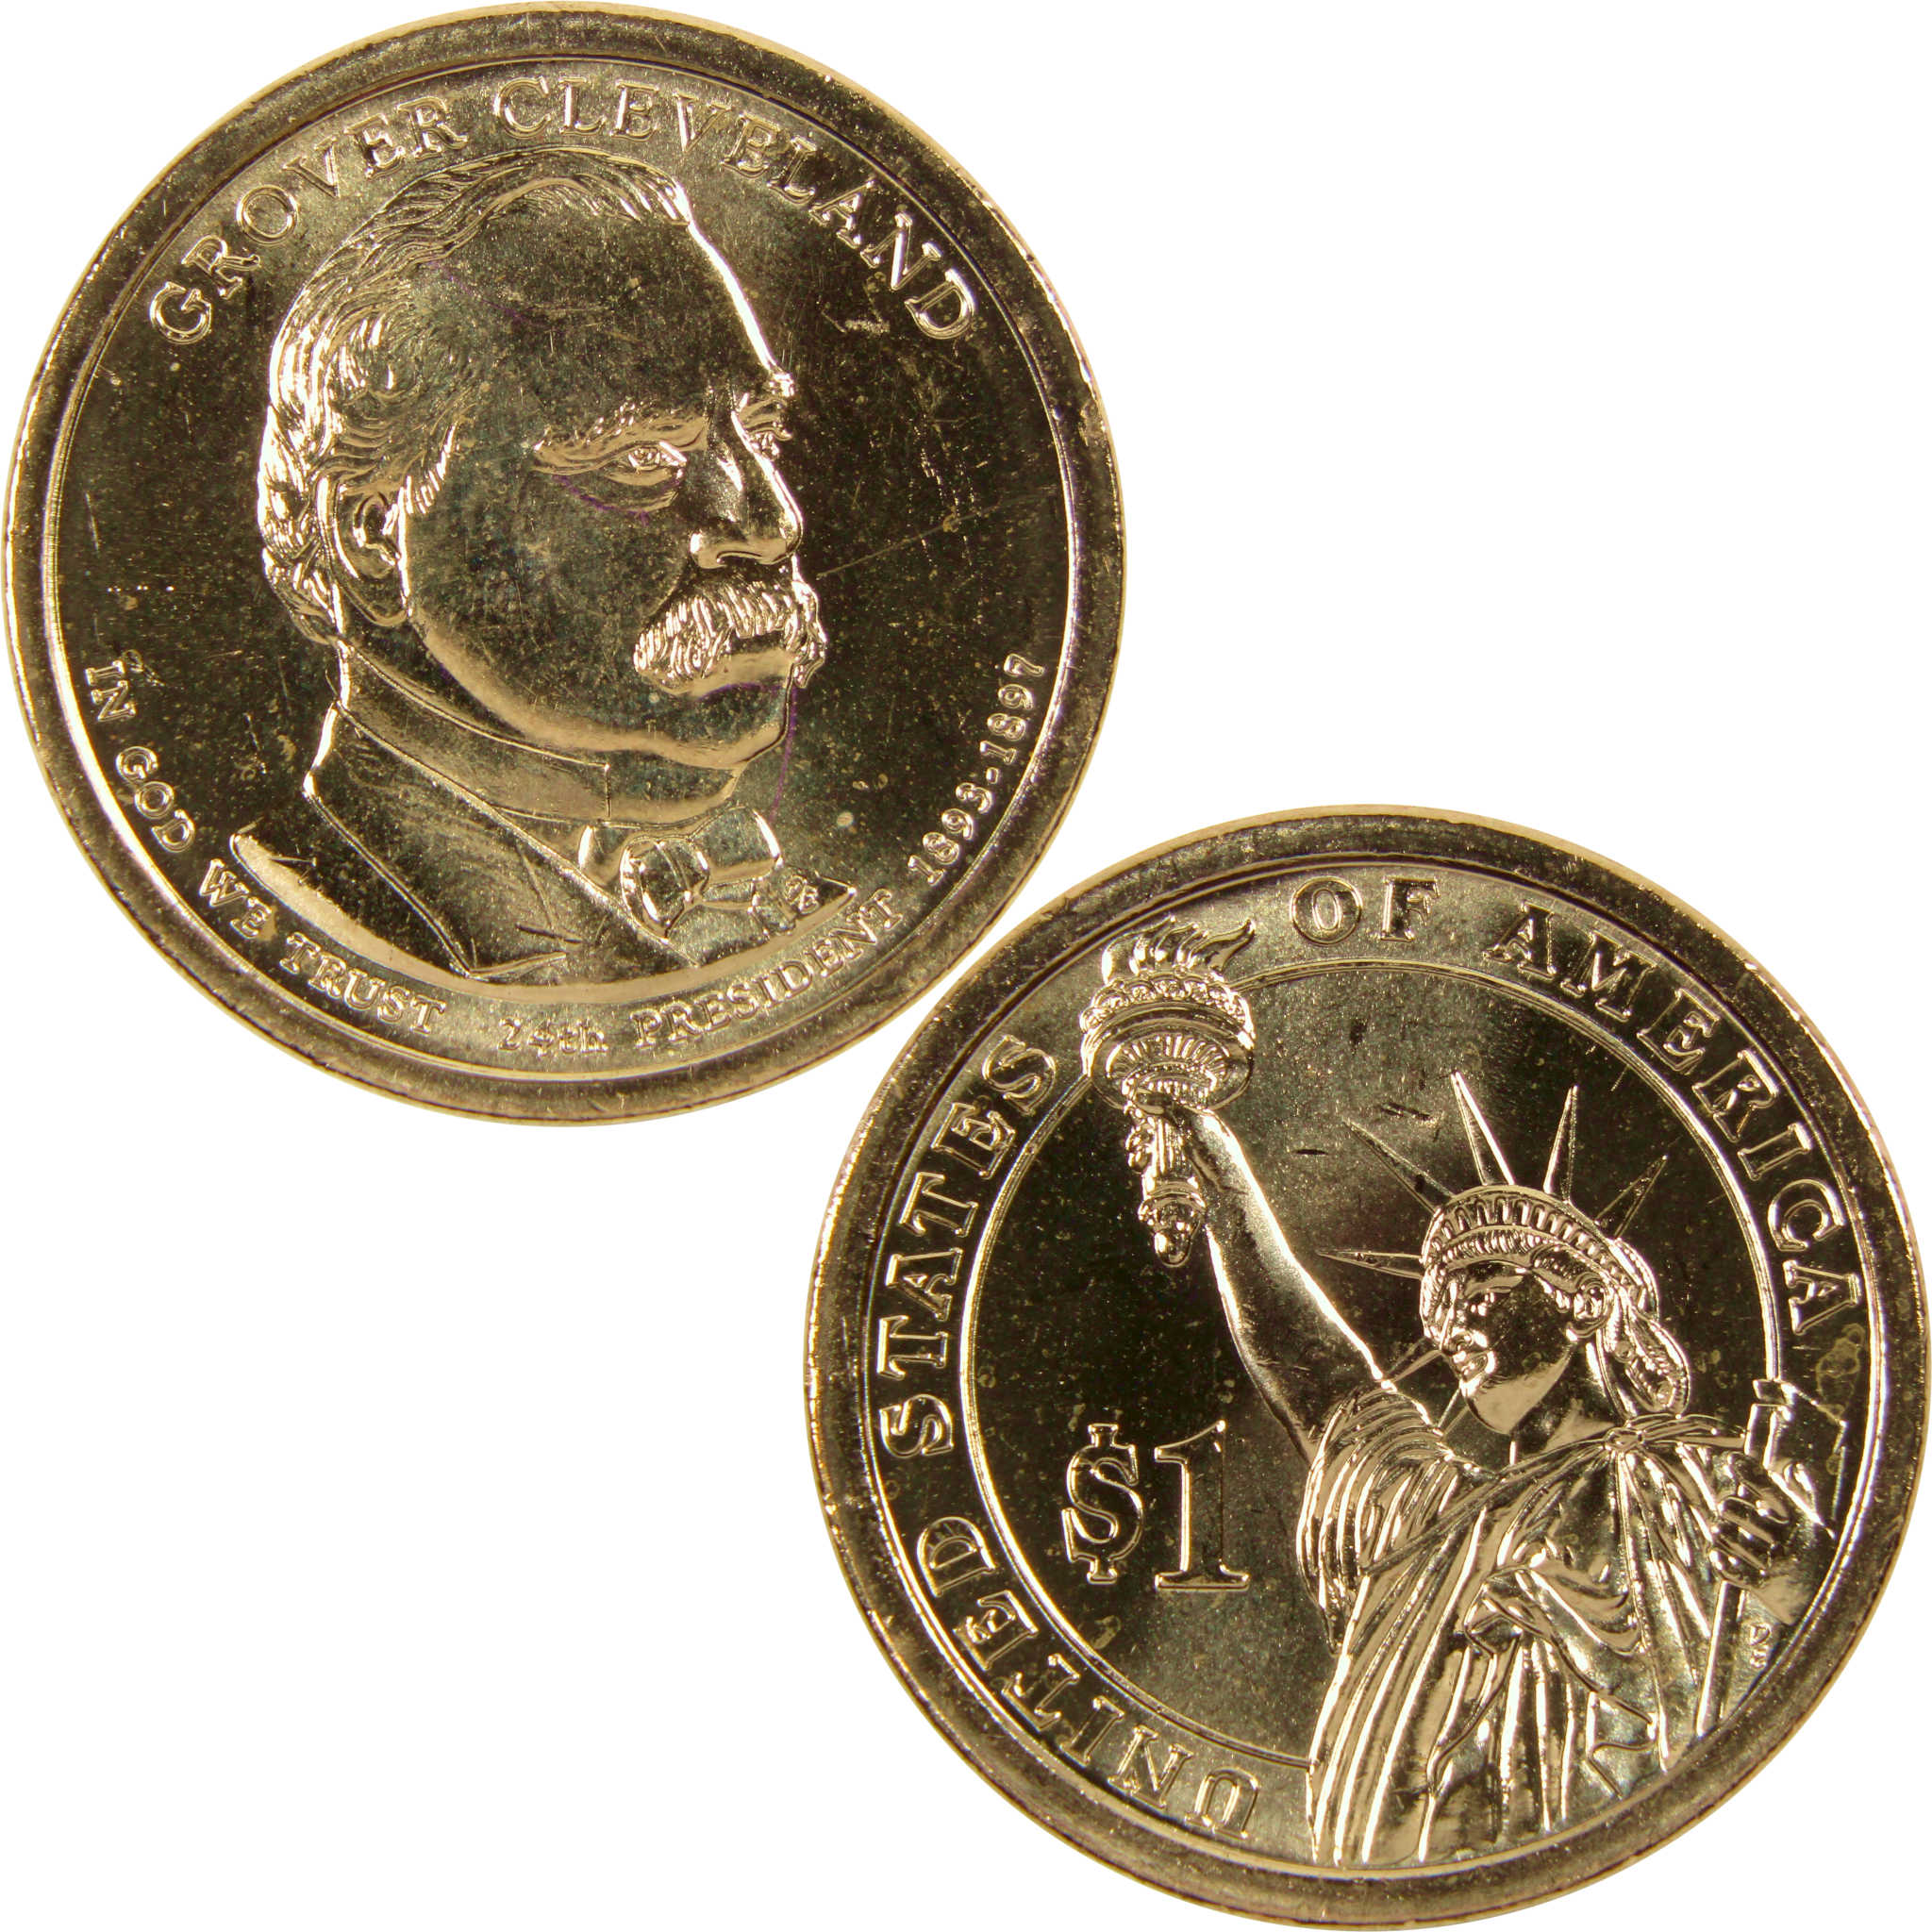 2012 P Grover Cleveland 2nd Term Presidential Dollar Uncirculated Coin